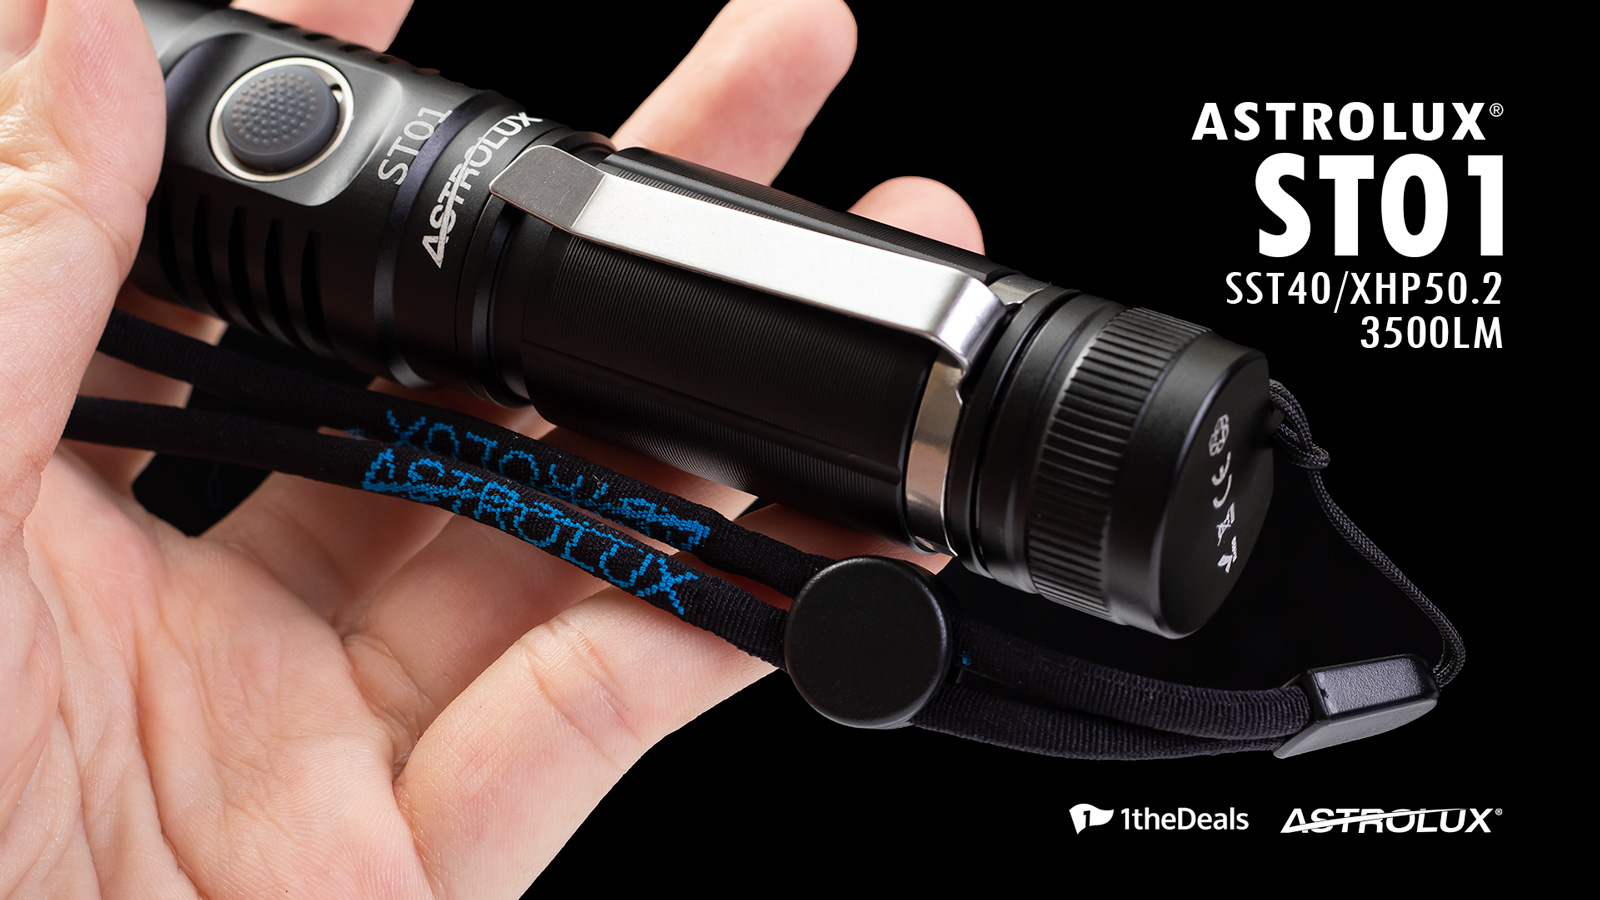 1theDeals Astrolux ST01 Flashlight